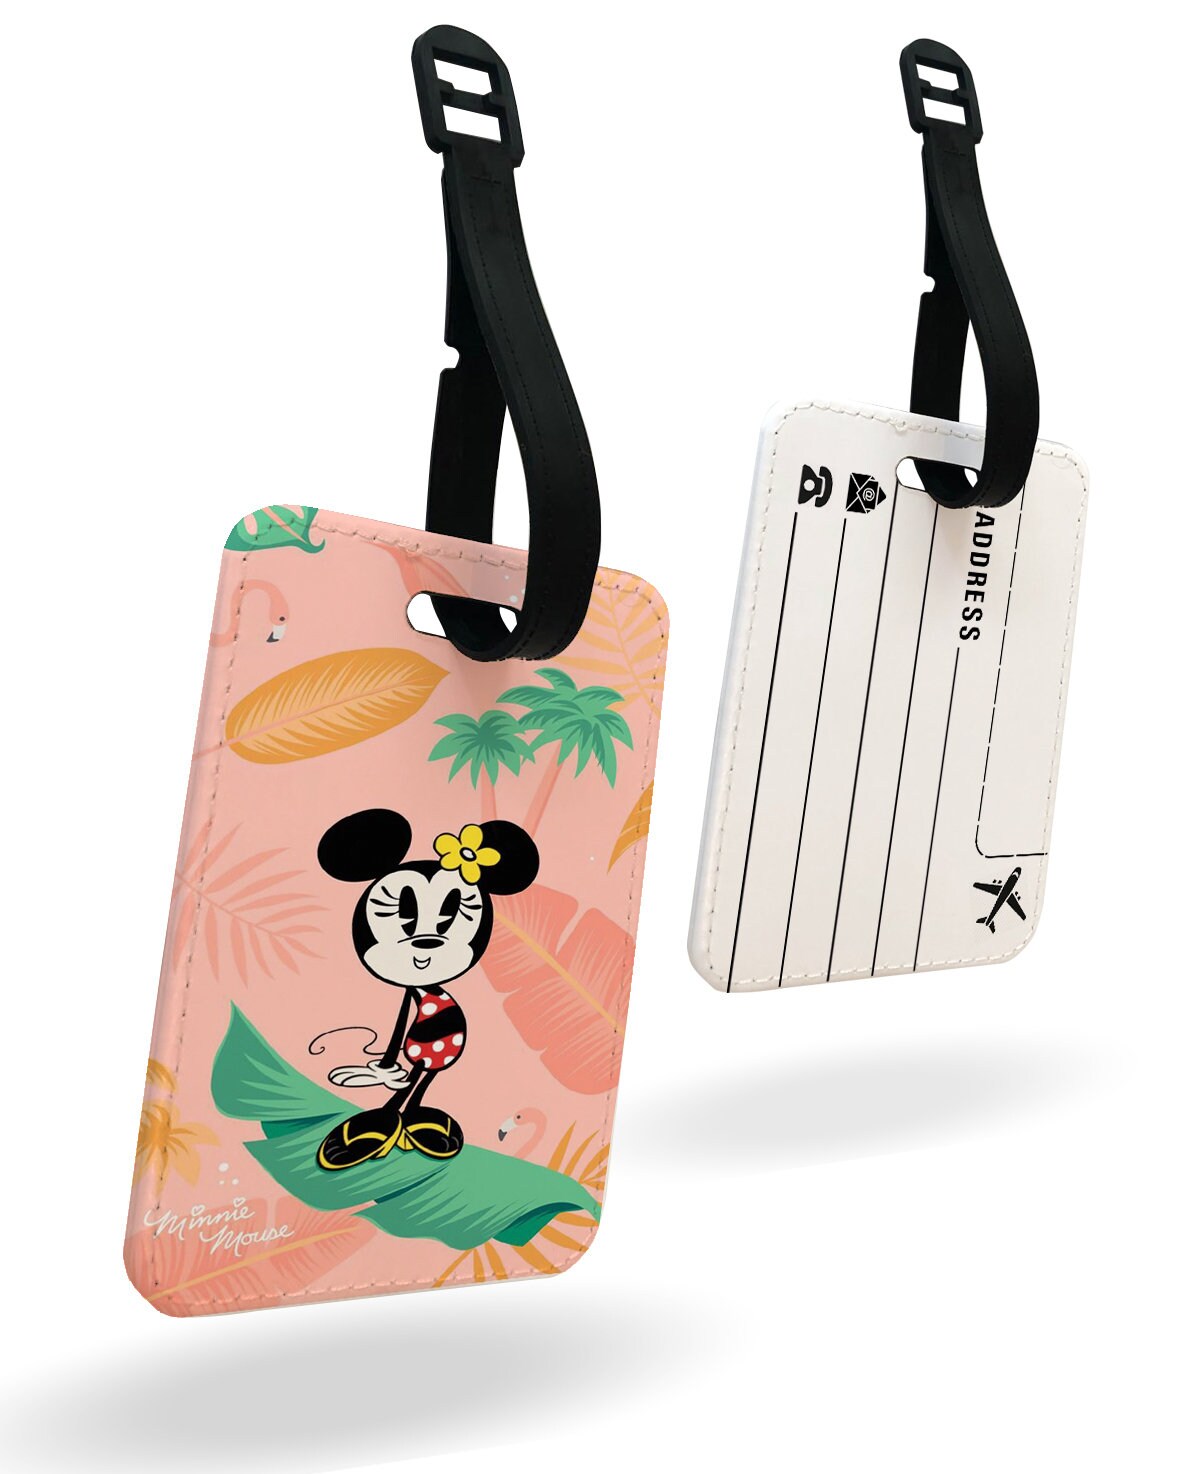 Personalised Faux Leather Passport Cover and Luggage Tag, Travel Accessory Set, Disney Minnie Mouse, Beach Holiday, Gift for her